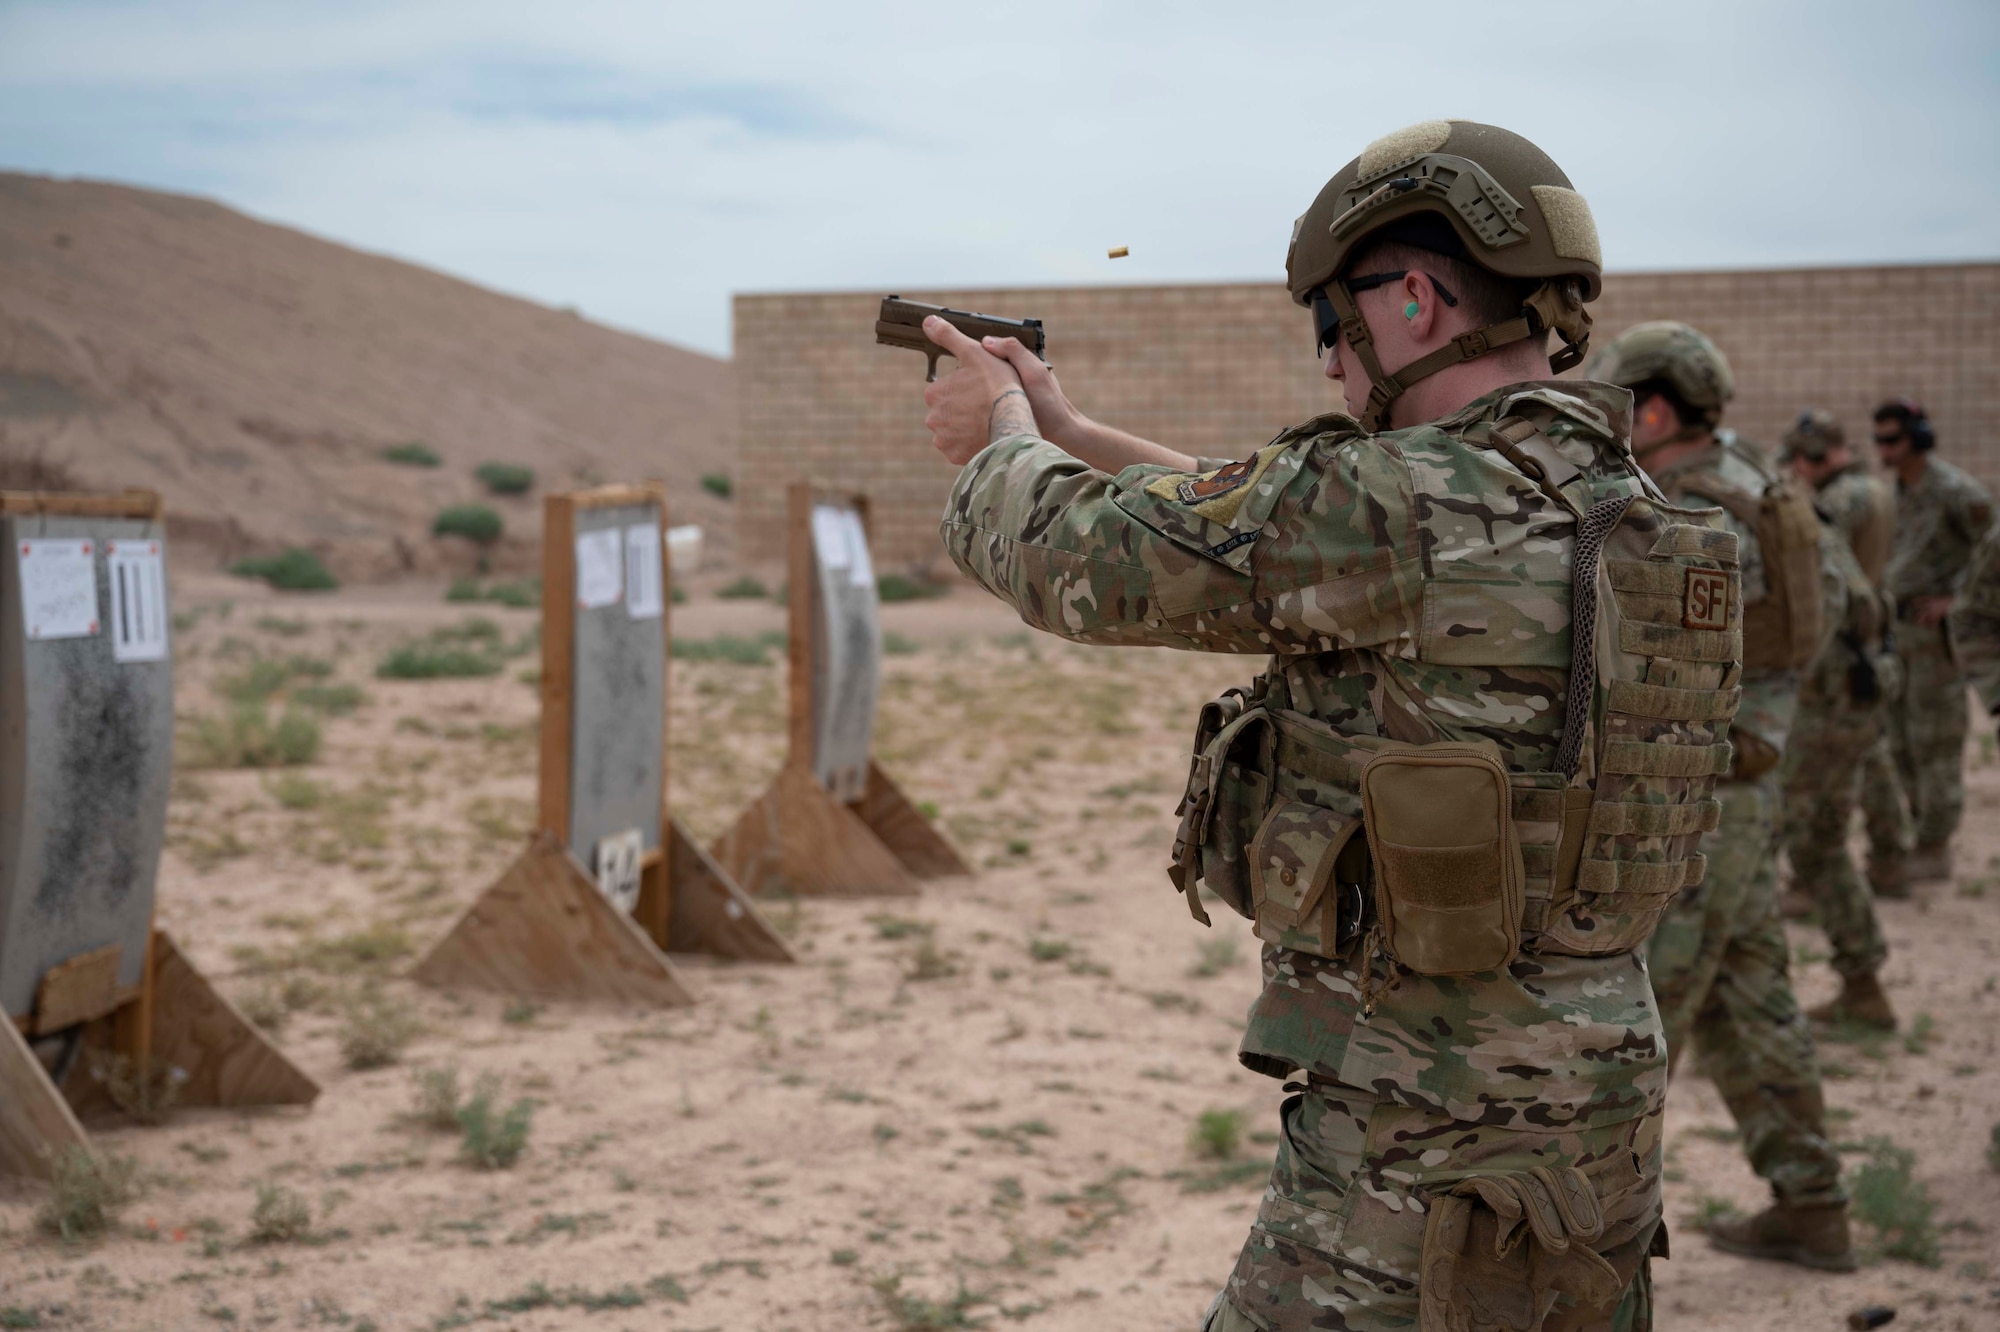 Airmen from the 49th Security Forces Squadron fire their weapons as part of the marksmanship portion of the Special Reaction Team tryouts at Holloman Air Force Base, New Mexico, June 9, 2023. The candidates were evaluated on their marksmanship skills to determine who would be selected for official SRT training at Fort Leonard Wood, Missouri. SRT tryouts determine the capability and accuracy of Airmen who are qualified to handle high-risk crisis situations. (U.S. Air Force photo by Airman 1st Class Michelle Ferrari)